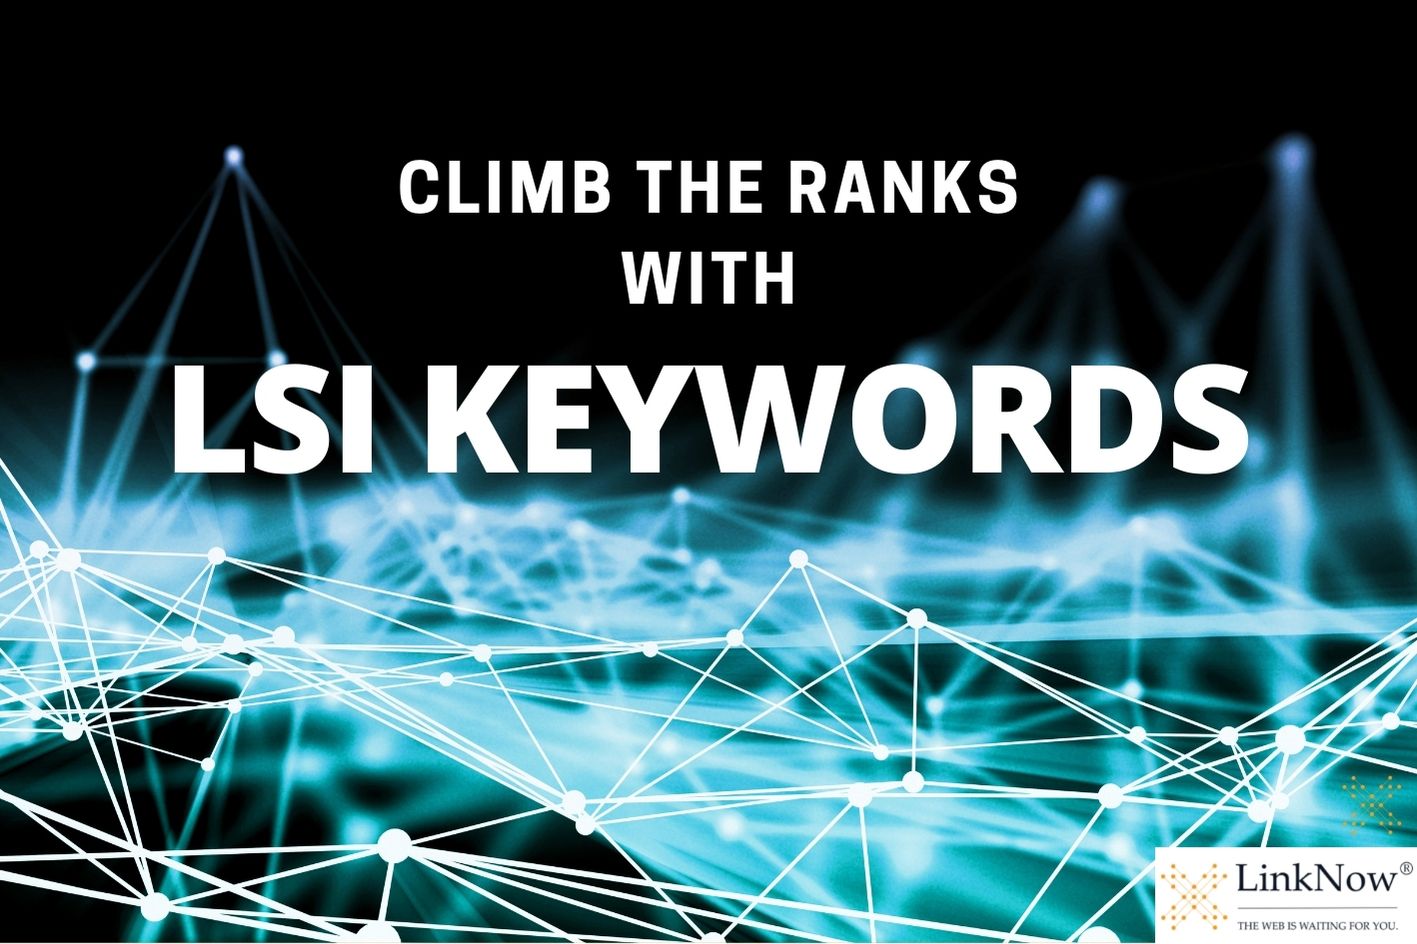 Background shows a web of interconnected nodes. Text says: Climb the ranks with LSI keywords.